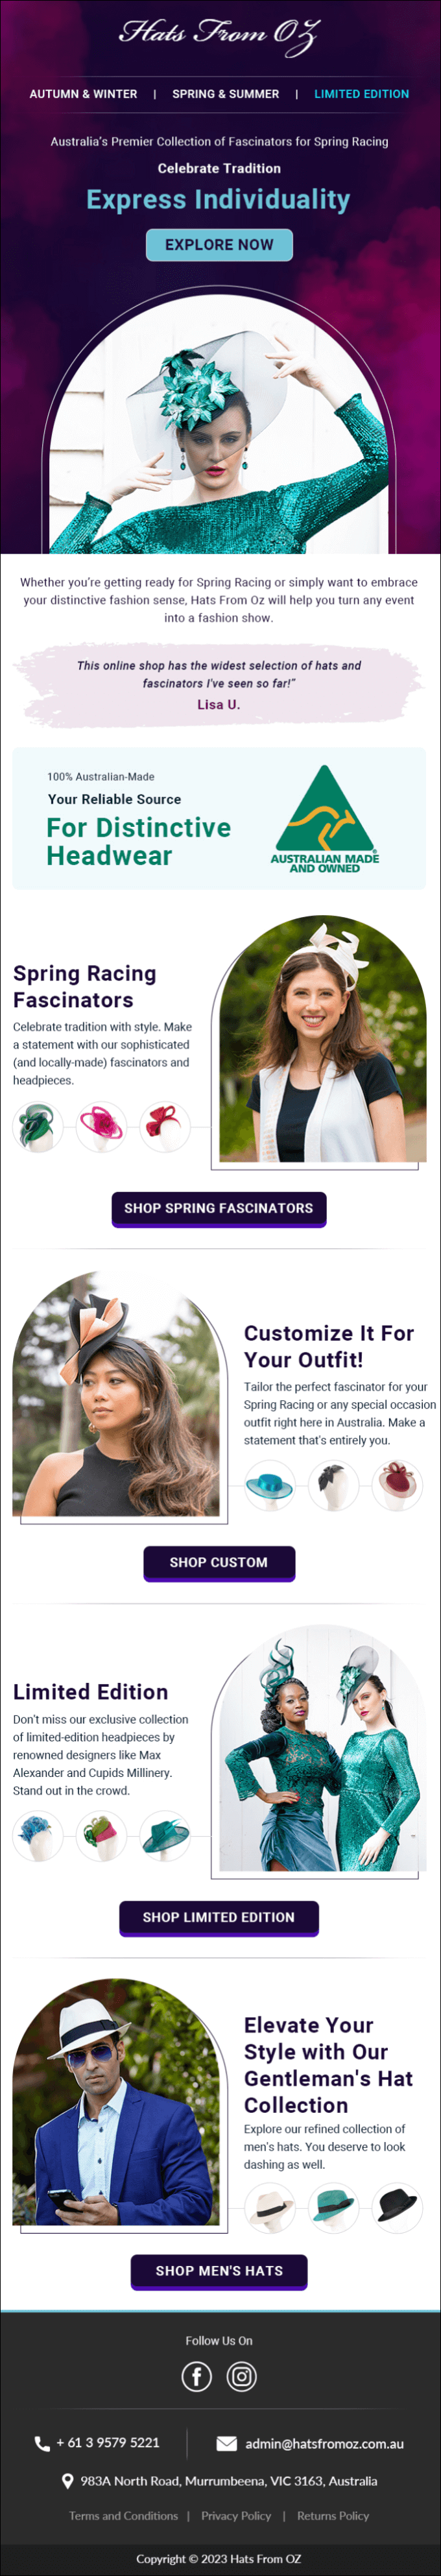 Hats From Oz - fashion email